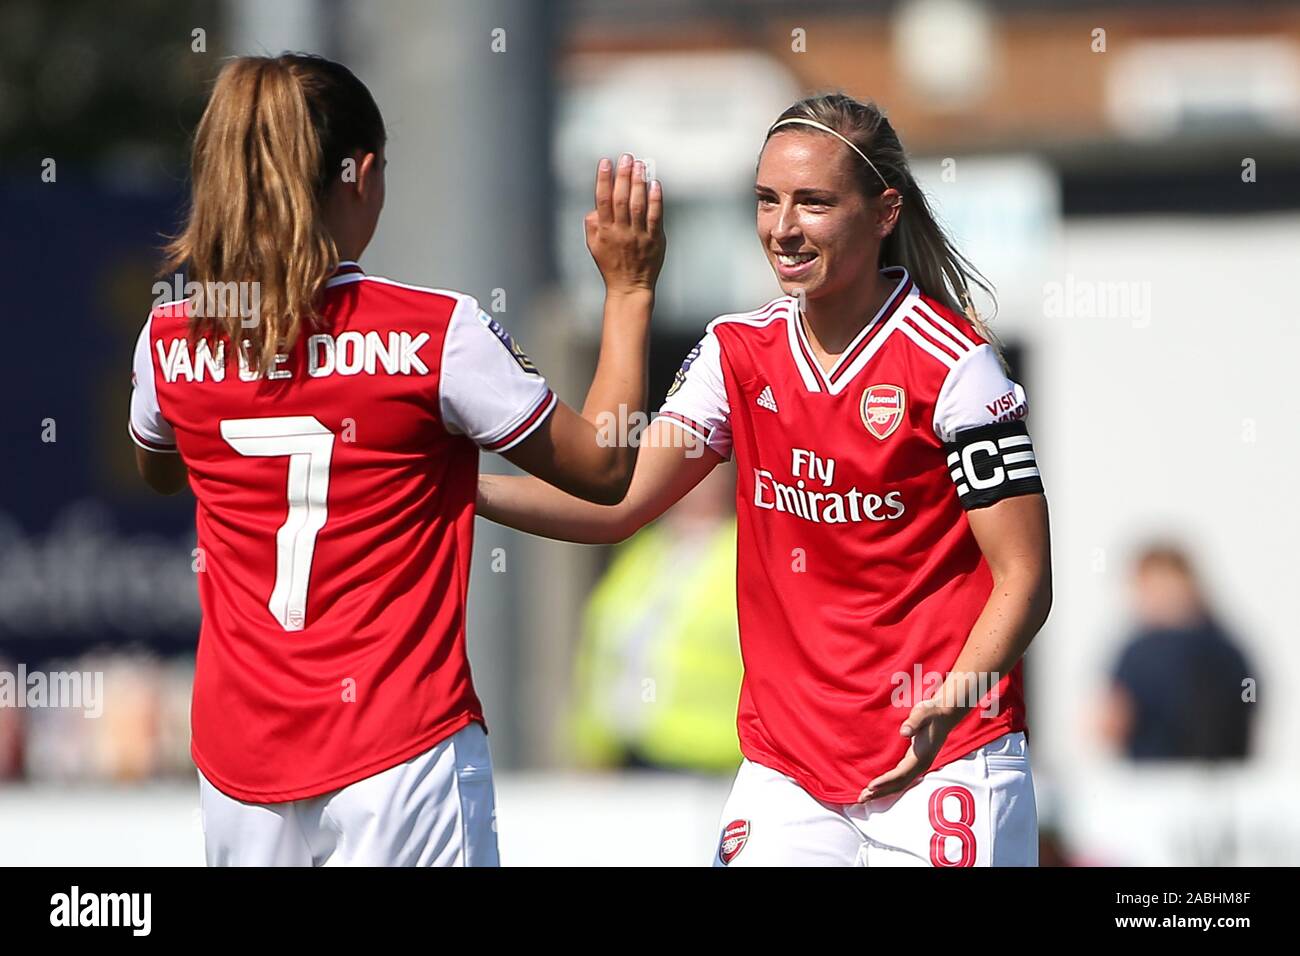 Jordan Nobbs is welcomed back to the Arsenal team after injury by Danielle  van de Donk during Arsenal Women vs Tottenham Hotspur Women, Friendly Match  Stock Photo - Alamy